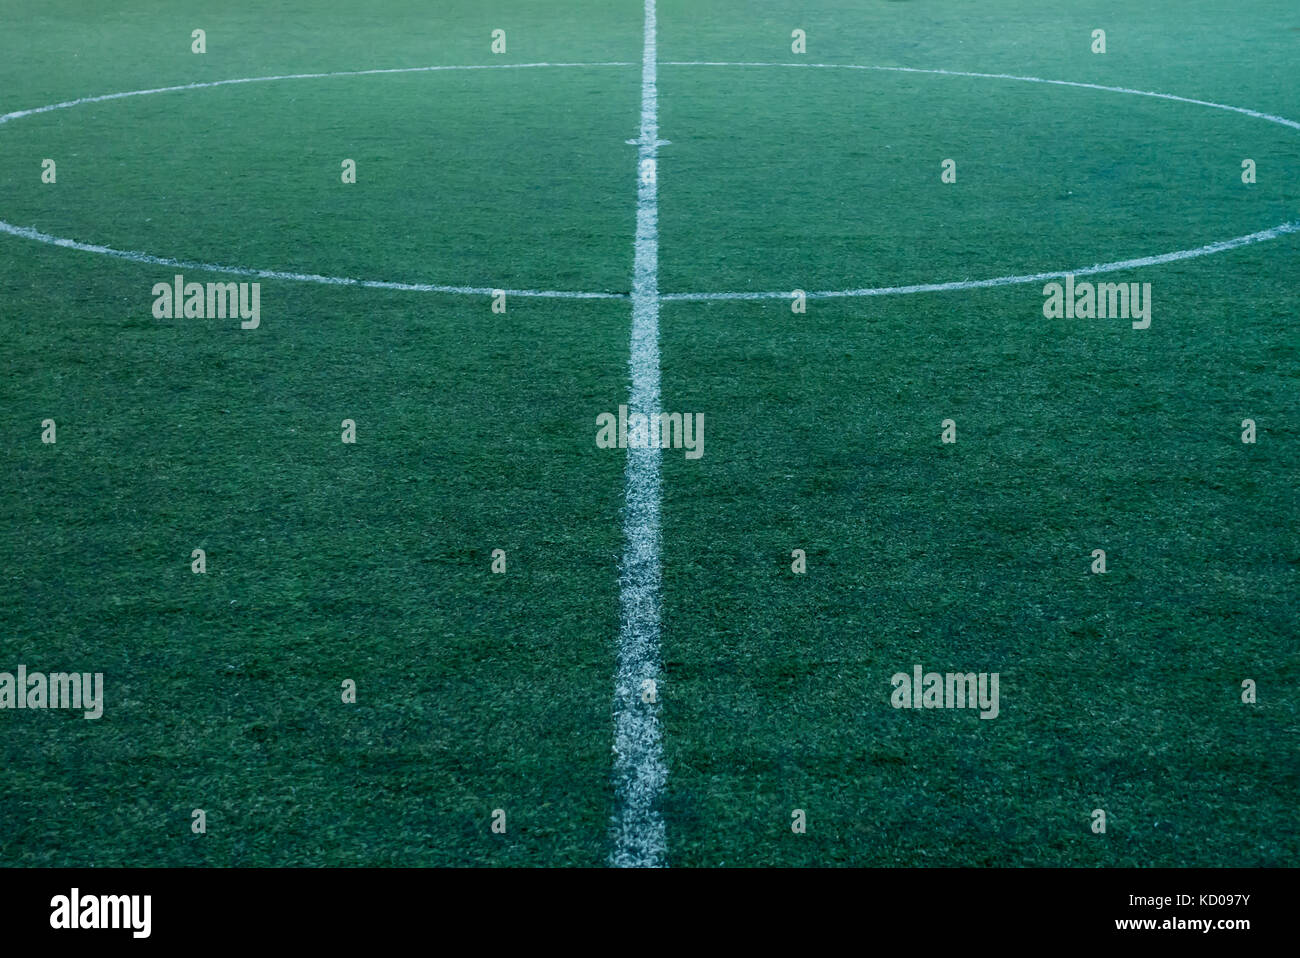 close up of a soccer field at night Stock Photo